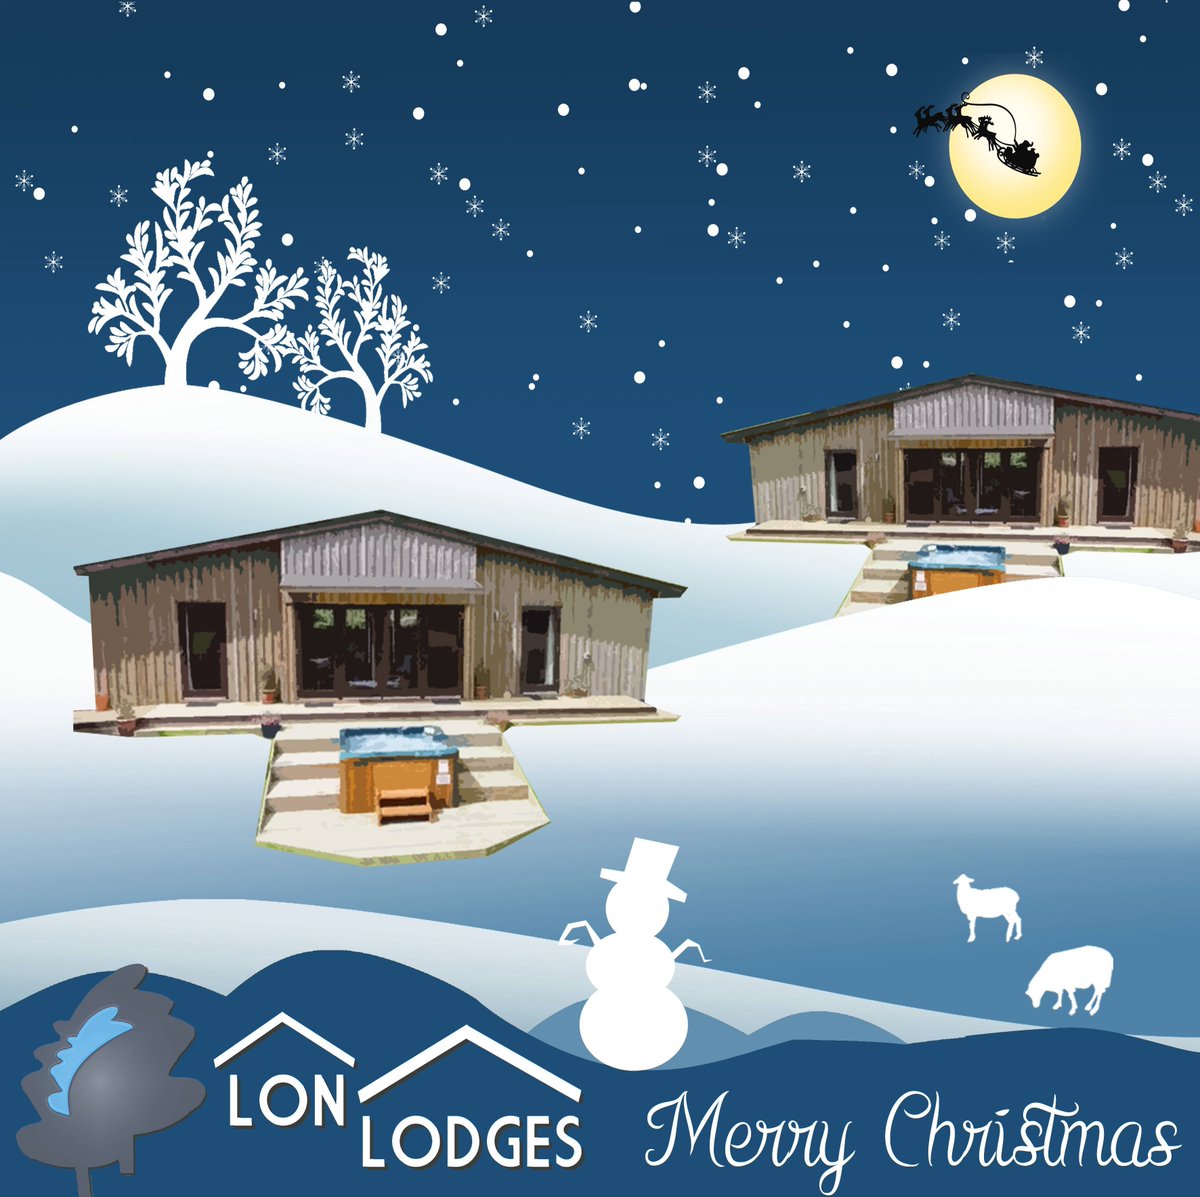 Merry Christmas and a Happy New Year to all our friends. Book now for 2018 while availability lonlodges.co.uk